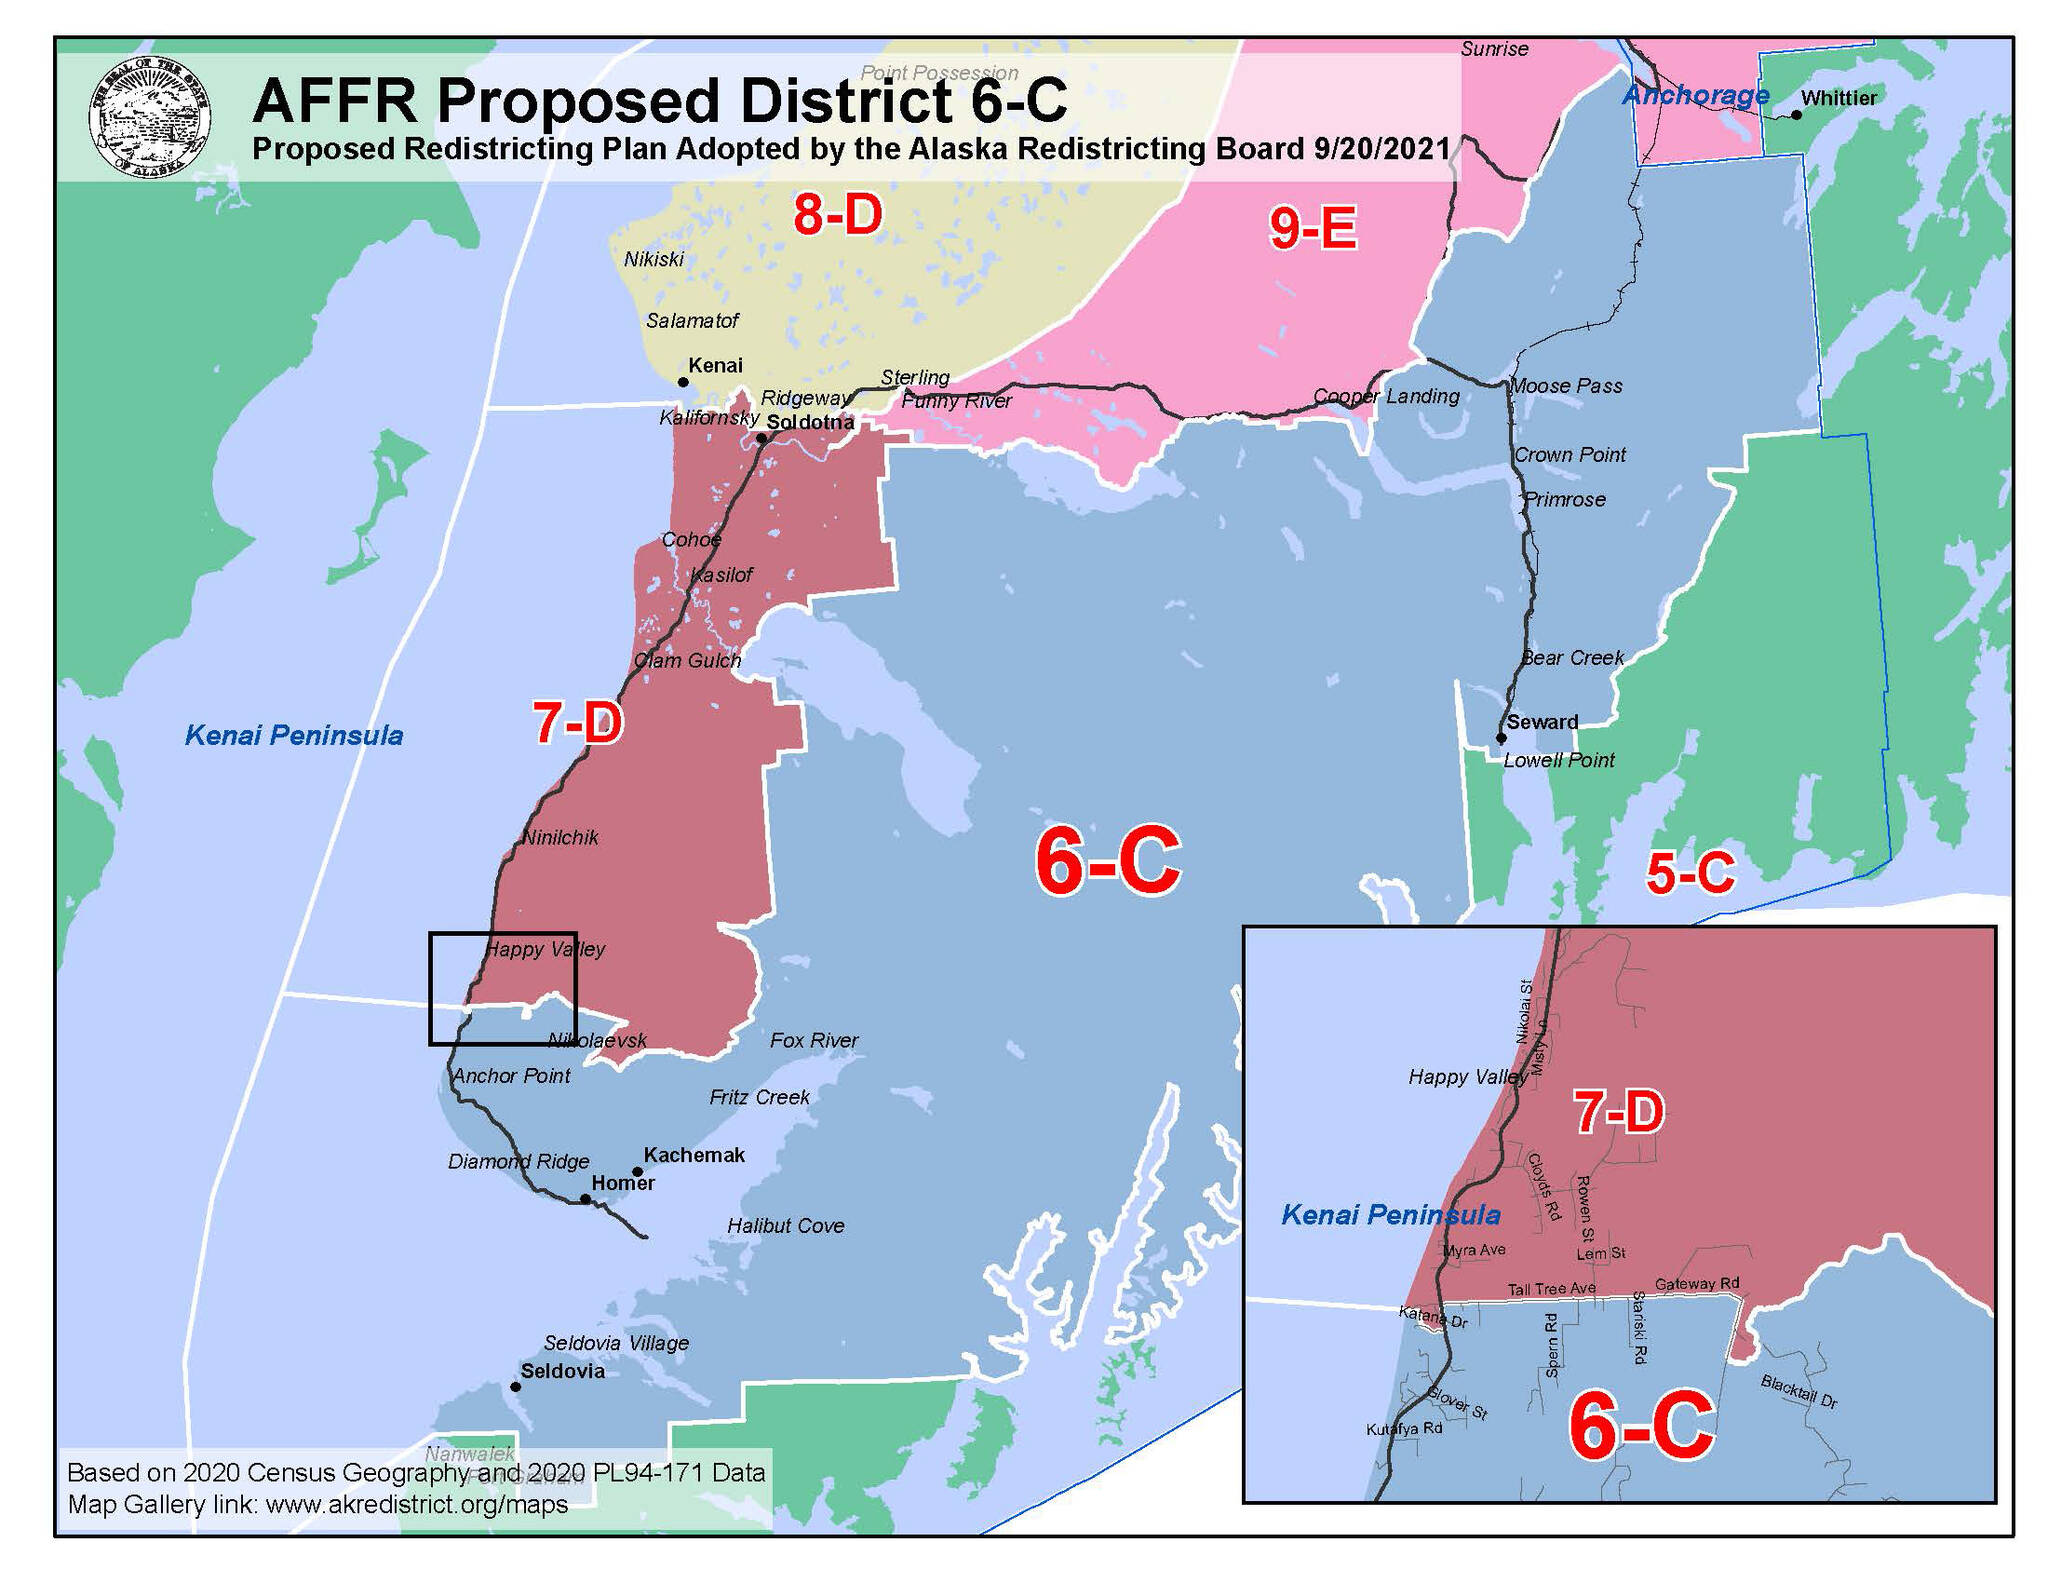 Alaskans for Fair Redistricting proposes a House District 6-C centered around the southern and eastern Kenai Peninsula that includes Homer, Anchor Point, Seldoiva and Seward in one district. It also puts the Russian Old Believer communities of Nikolaevsk, Razdolna, Voznesenka and Kachemak Selo in the same district. (Map courtesy of Alaskans for Fair Redistricting)